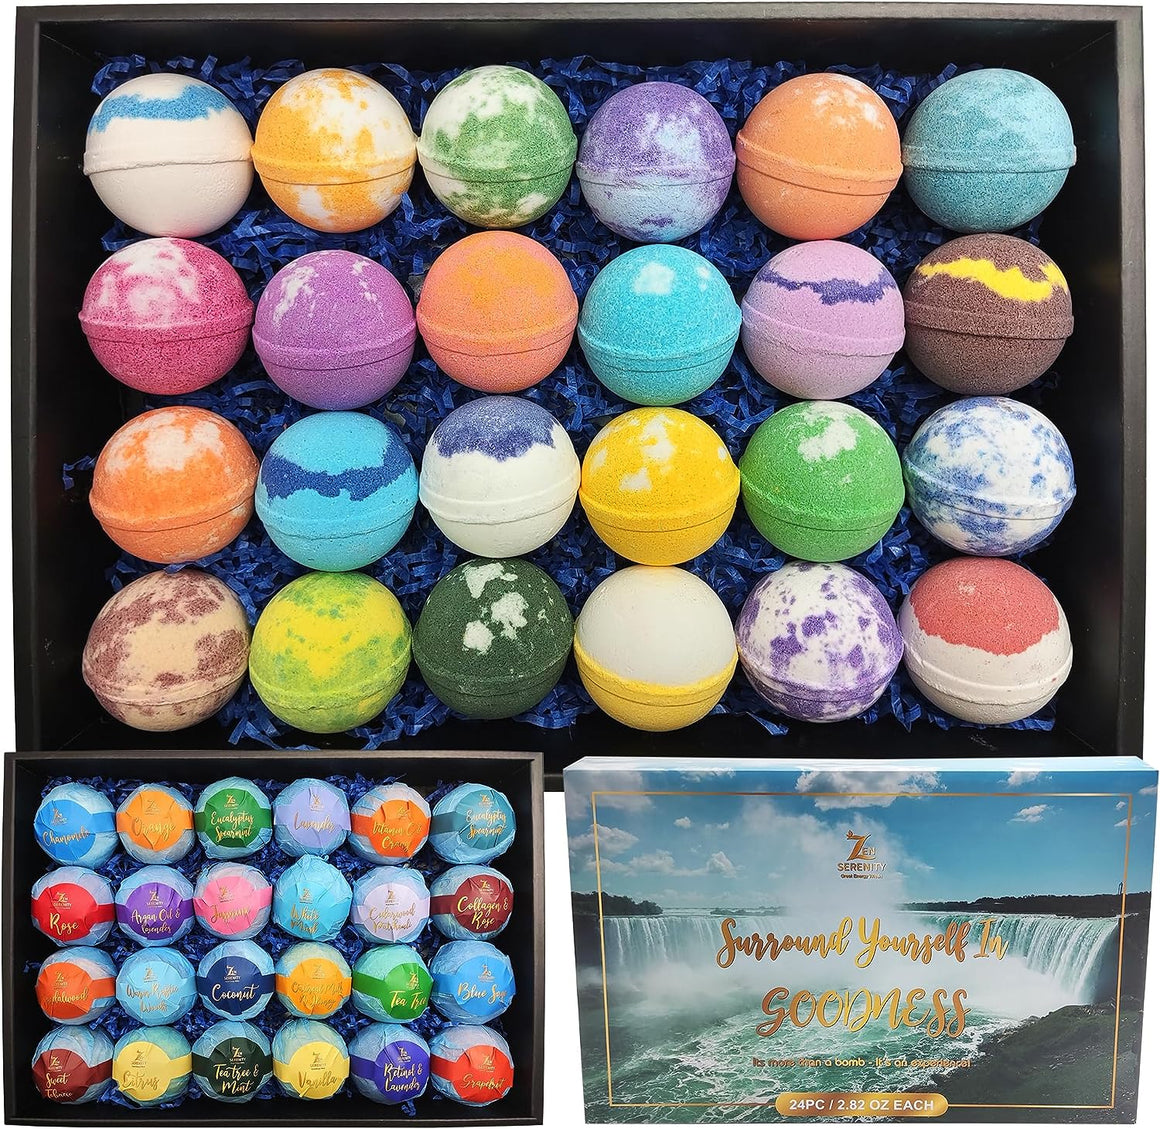 Natural Goodness 24 Bath Bombs Gift Set for Men, Women and Kids. Individually Wrapped Luxury Bath Bombs Infused with Essential Oils